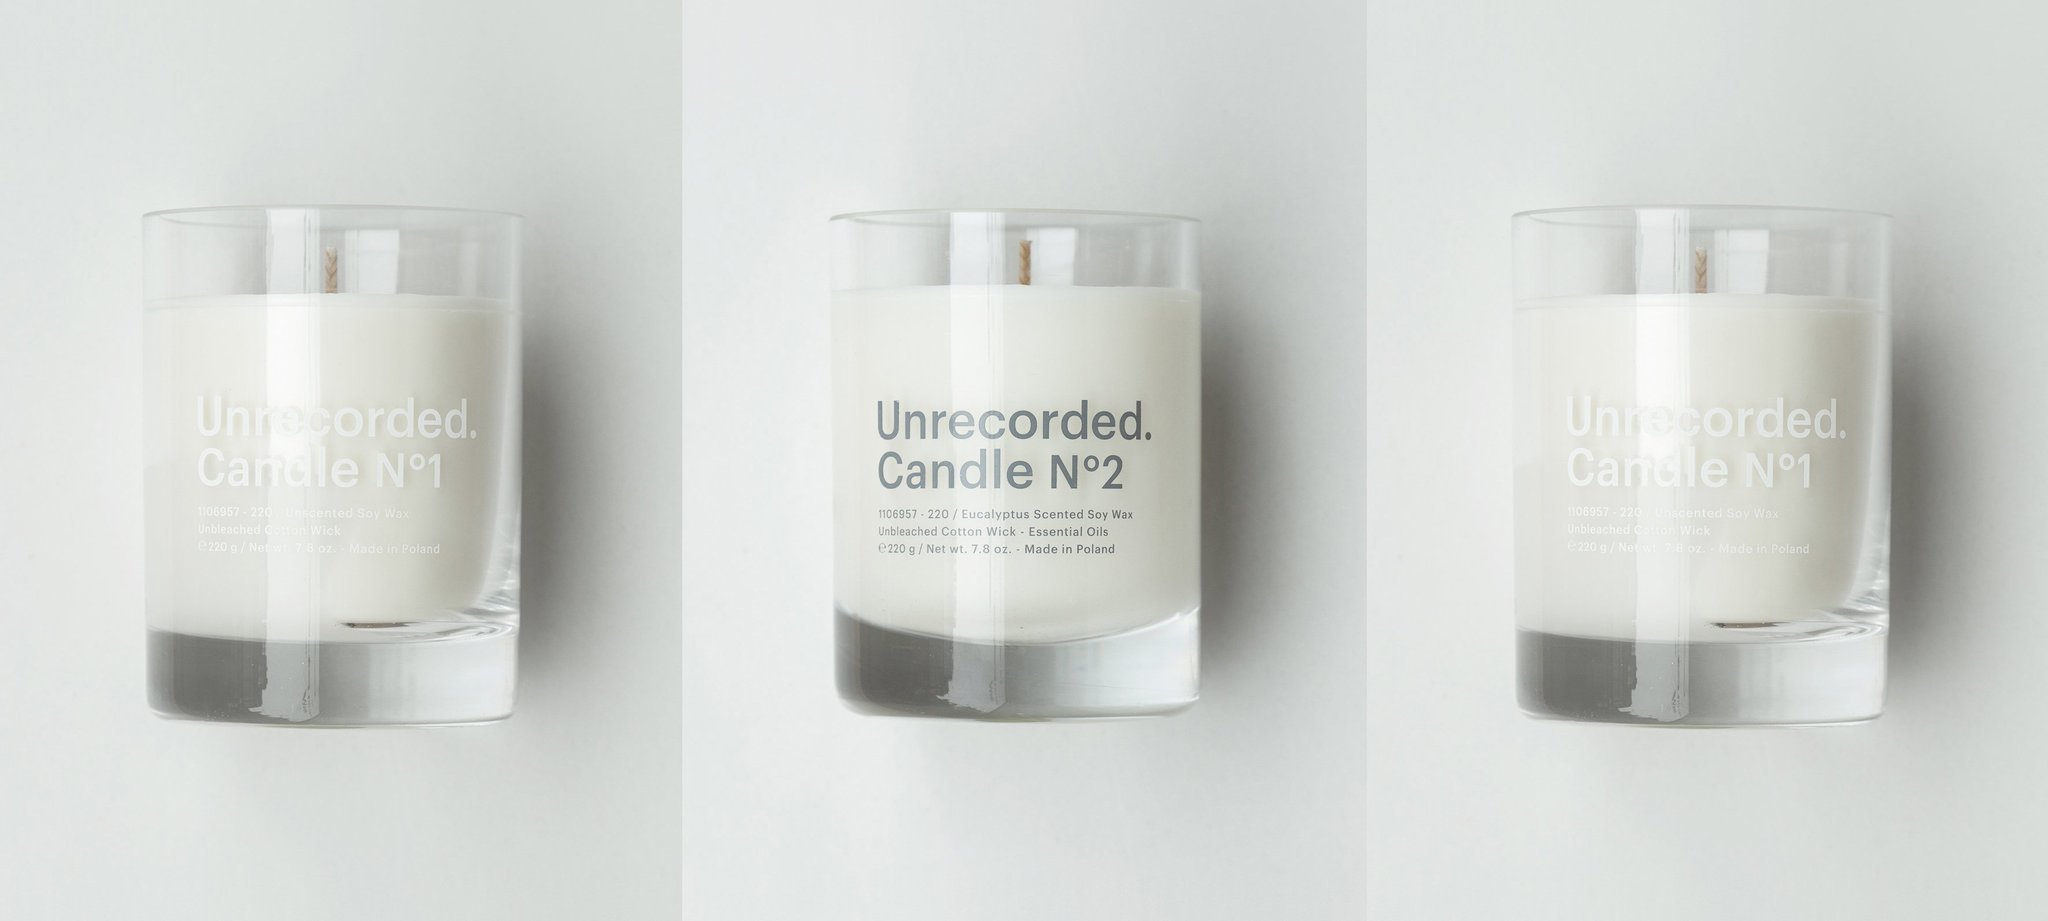 Autumn marks the release of Unrecorded’s candle range